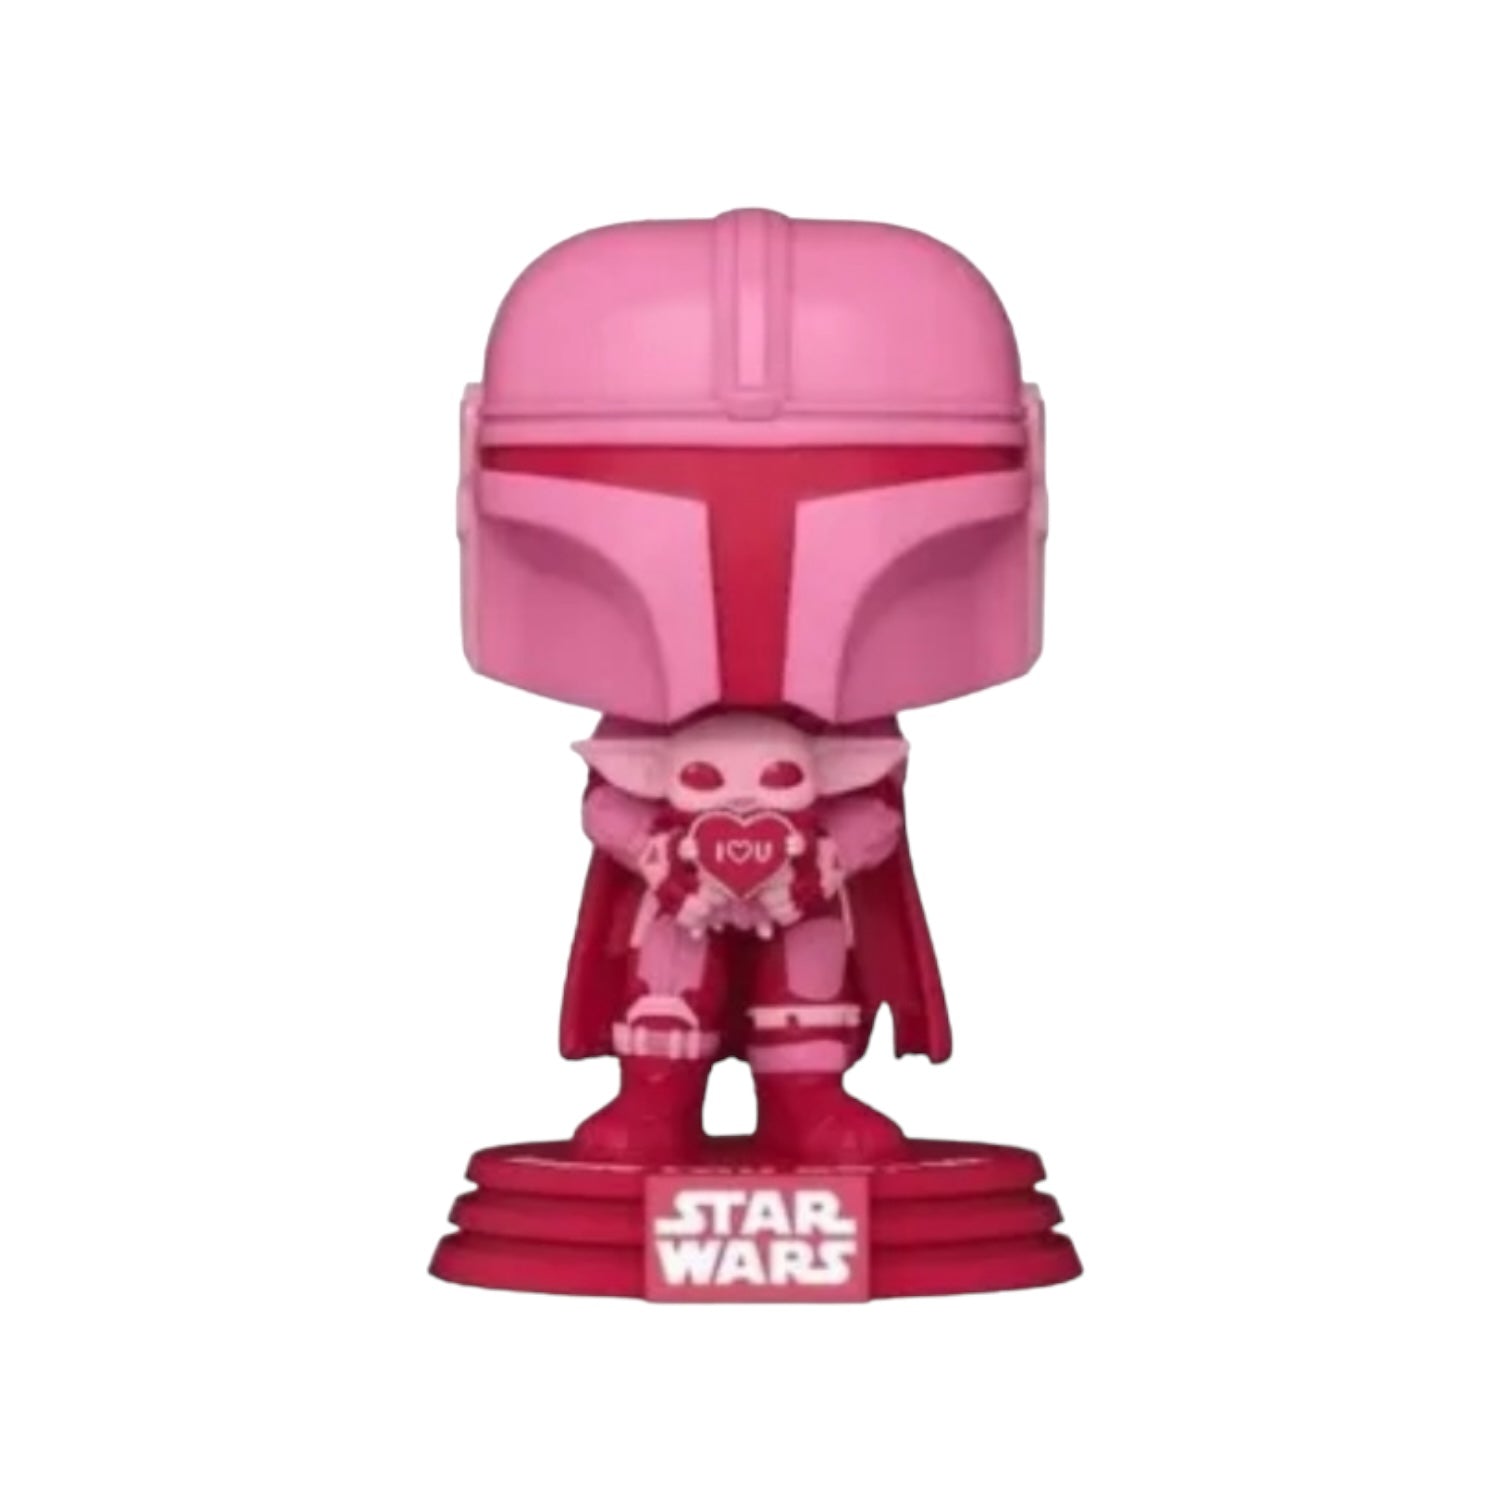 The Mandalorian with Grogu #498 Funko Pop! - Valentines Star Wars - Special Edition